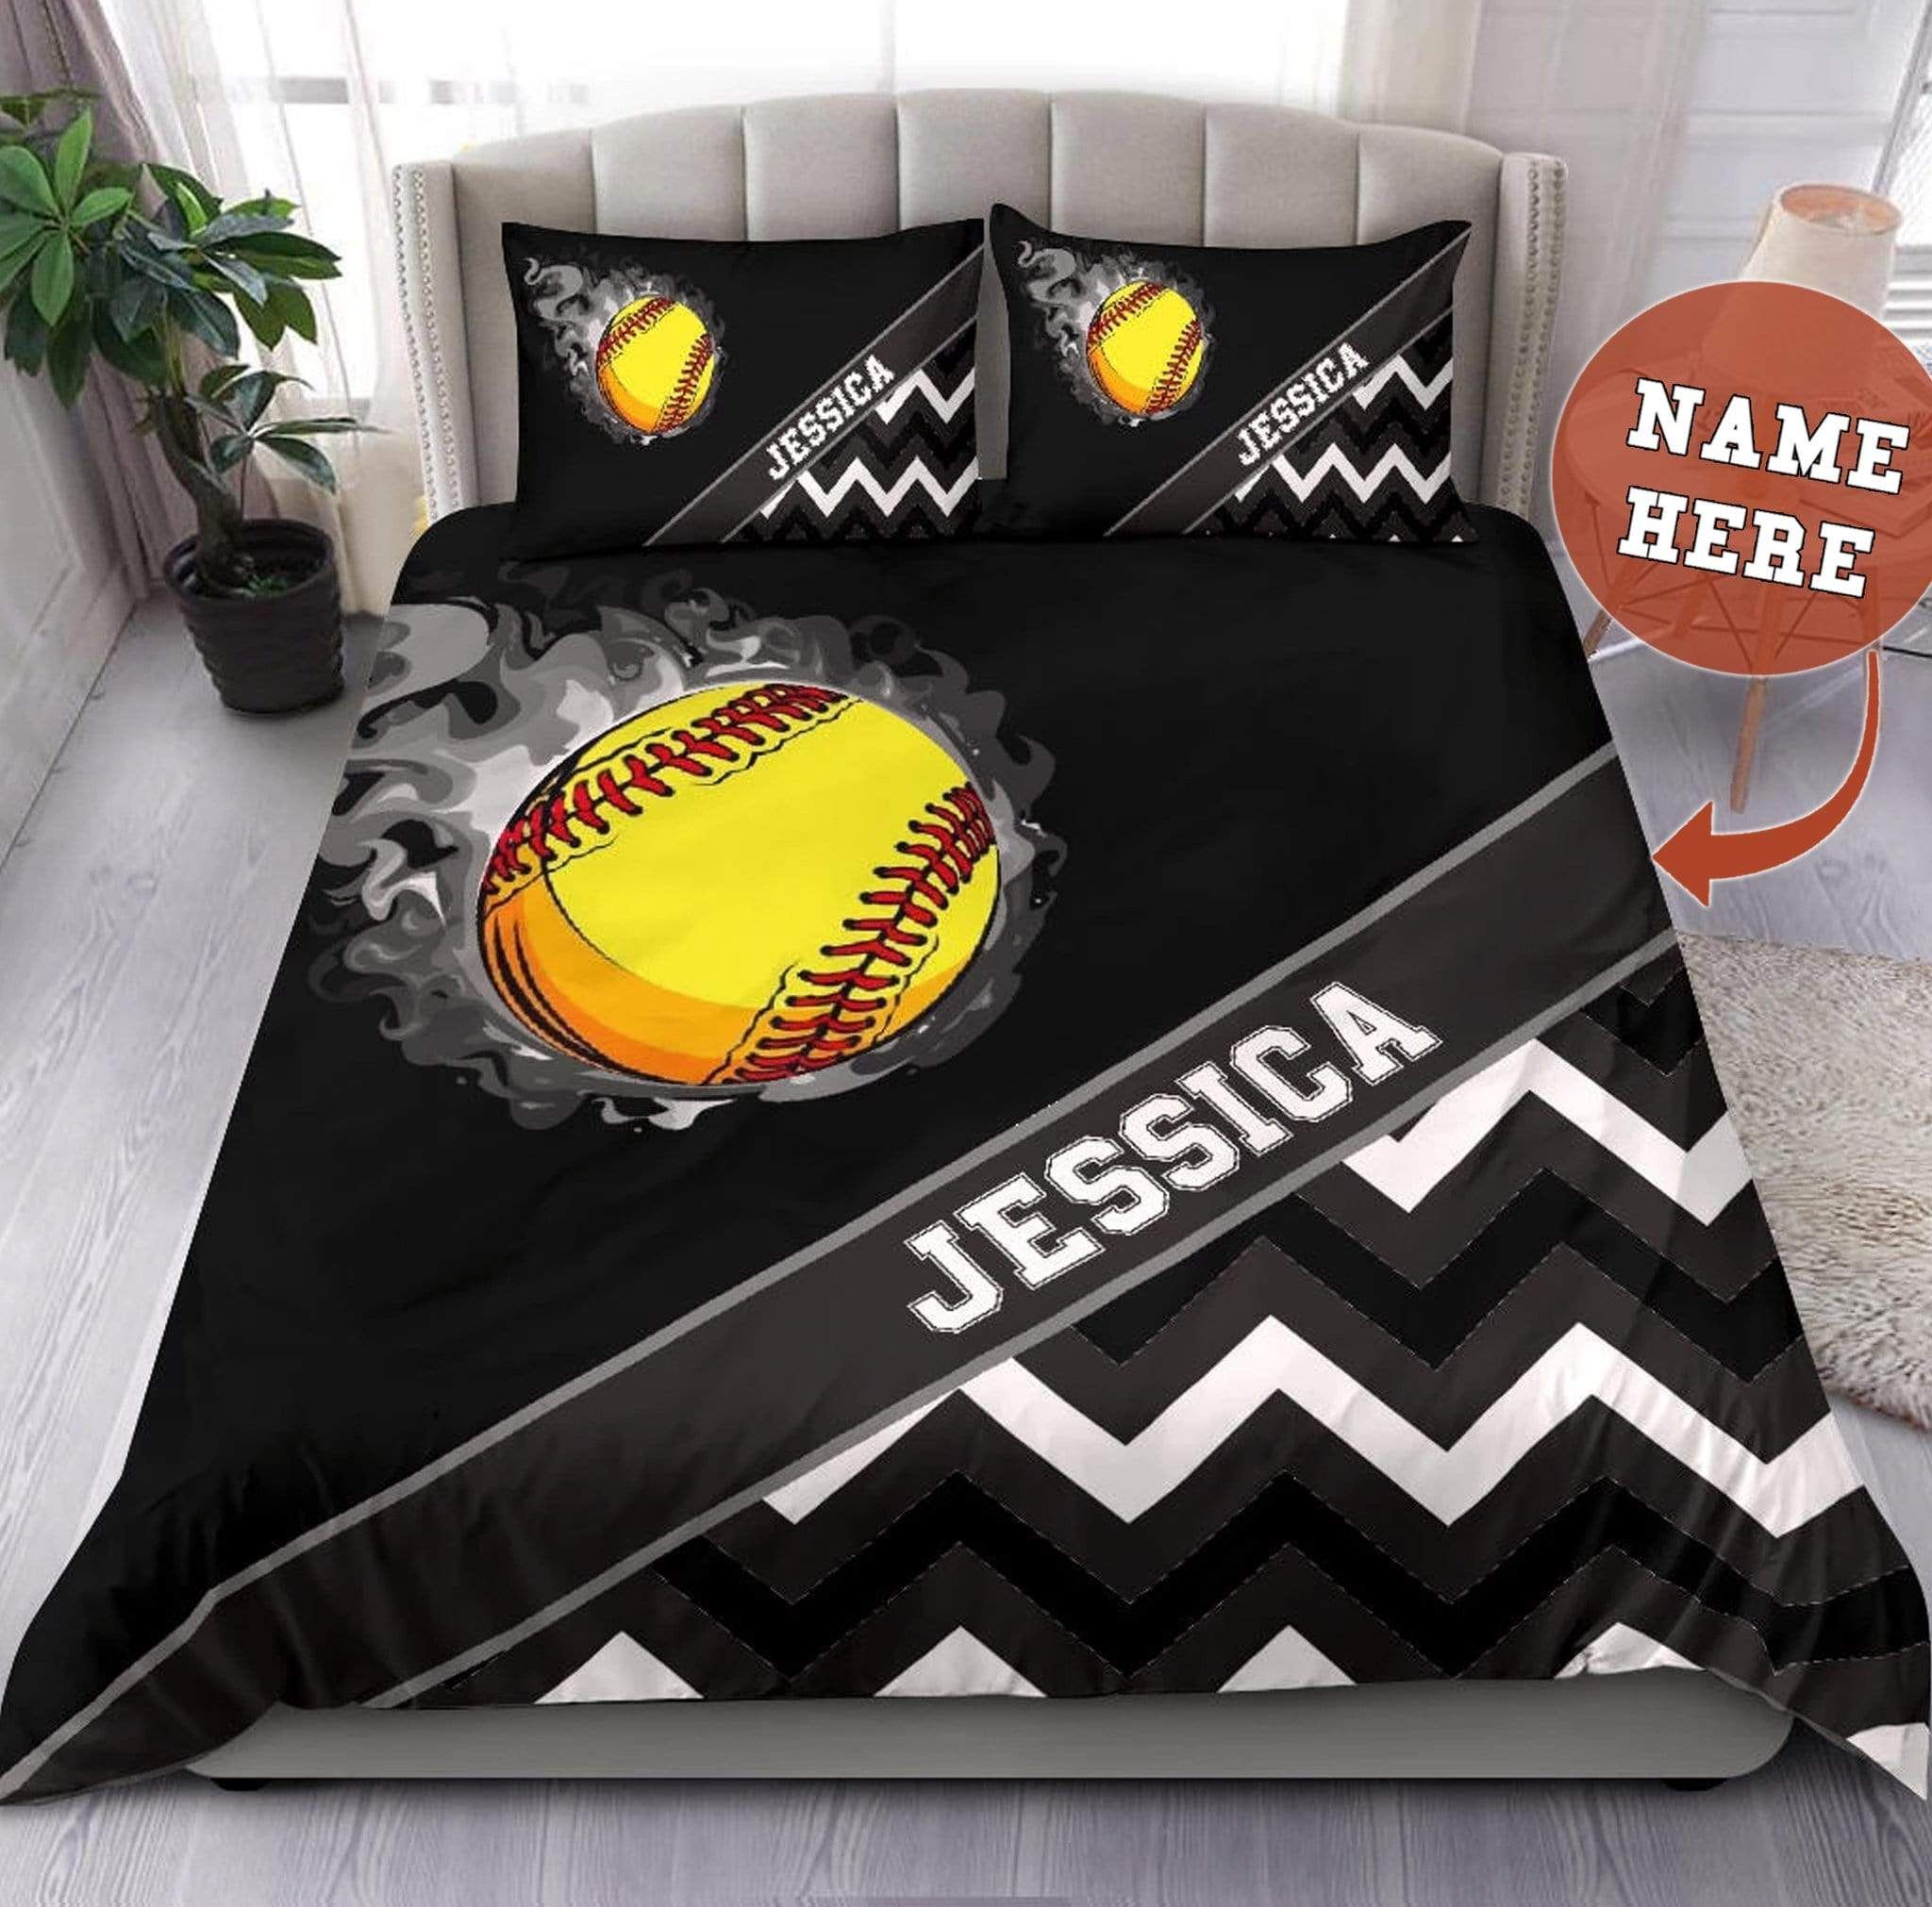 Personalized Customized Duvet Cover Softball Zikzak Black Bedding Set With Your Name